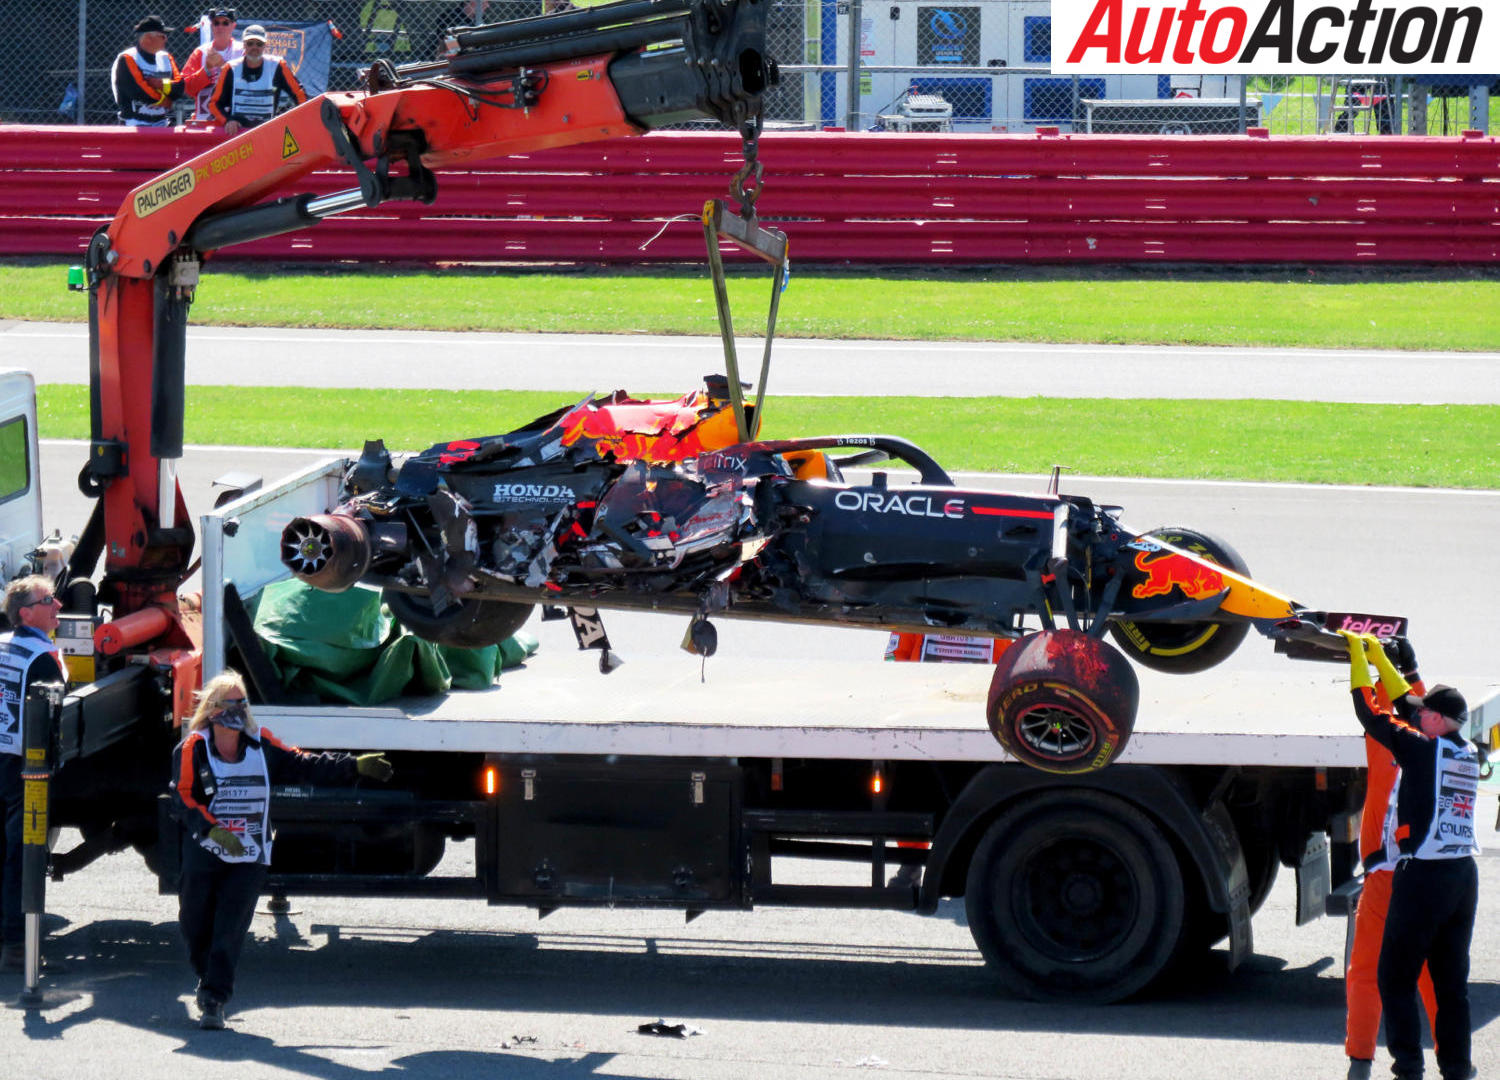 FIA rejects Red Bull appeal - Image: Motorsport Images